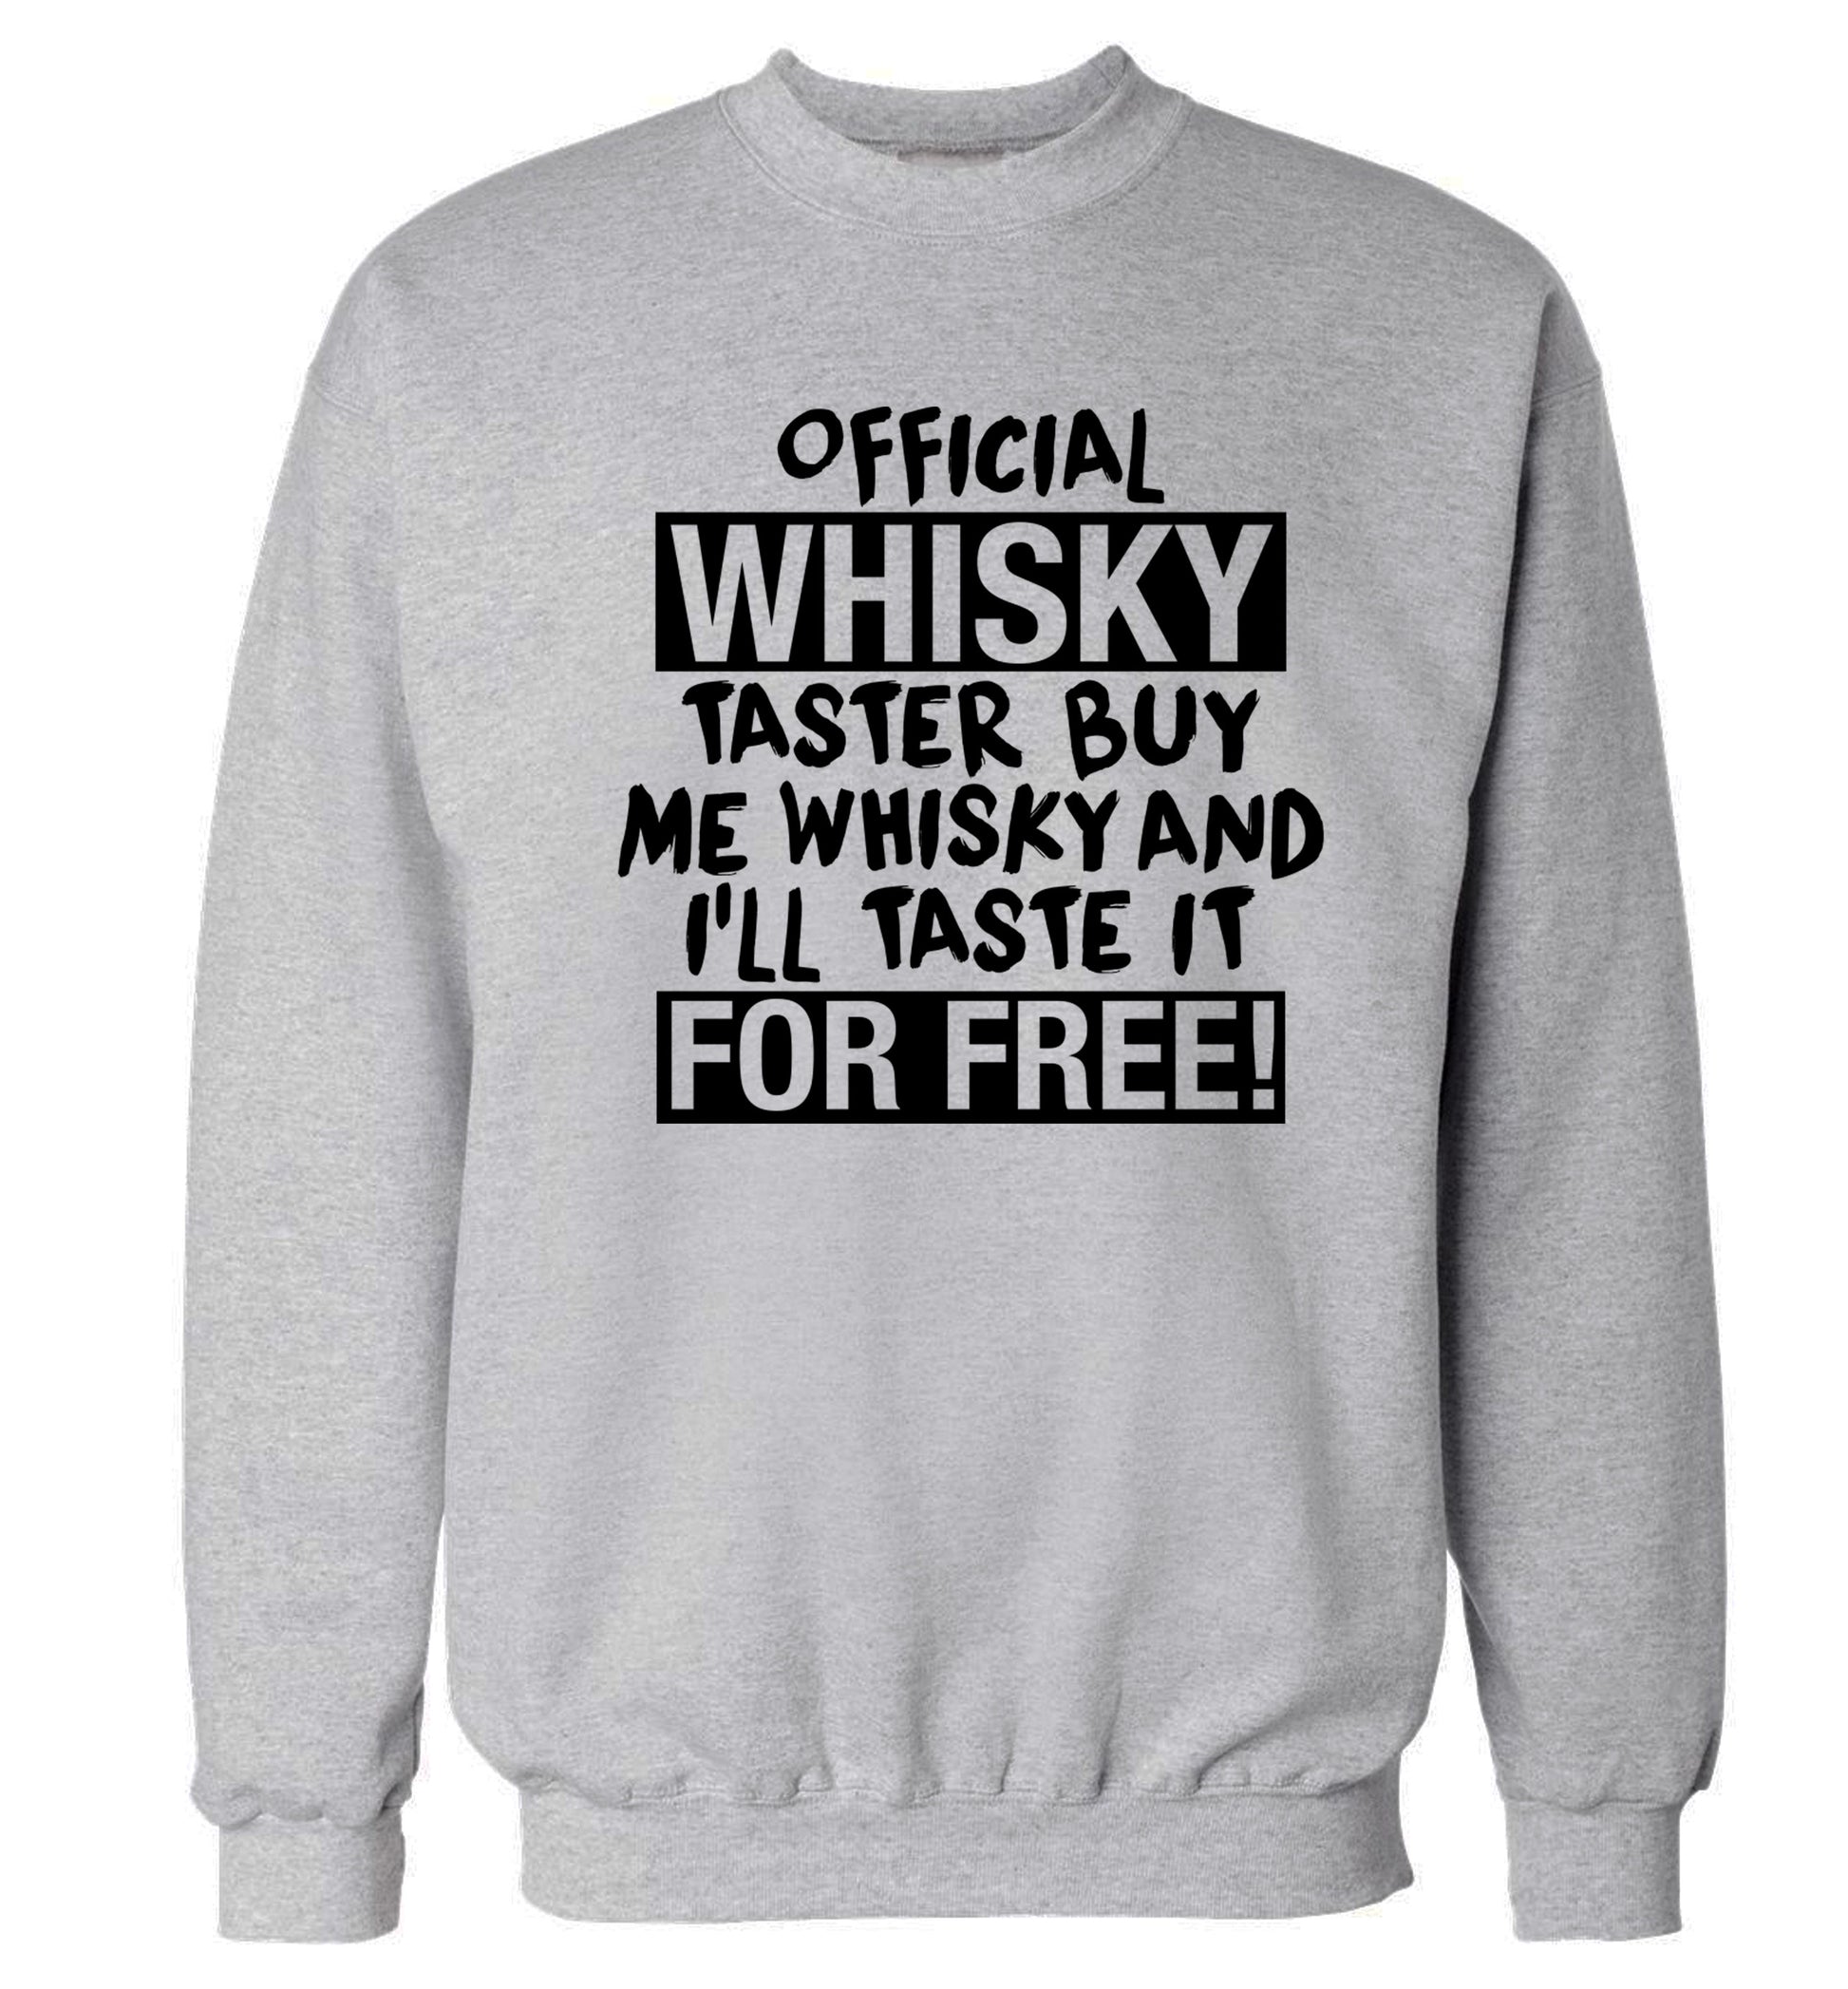 Official whisky taster buy me whisky and I'll taste it for free Adult's unisex grey Sweater 2XL